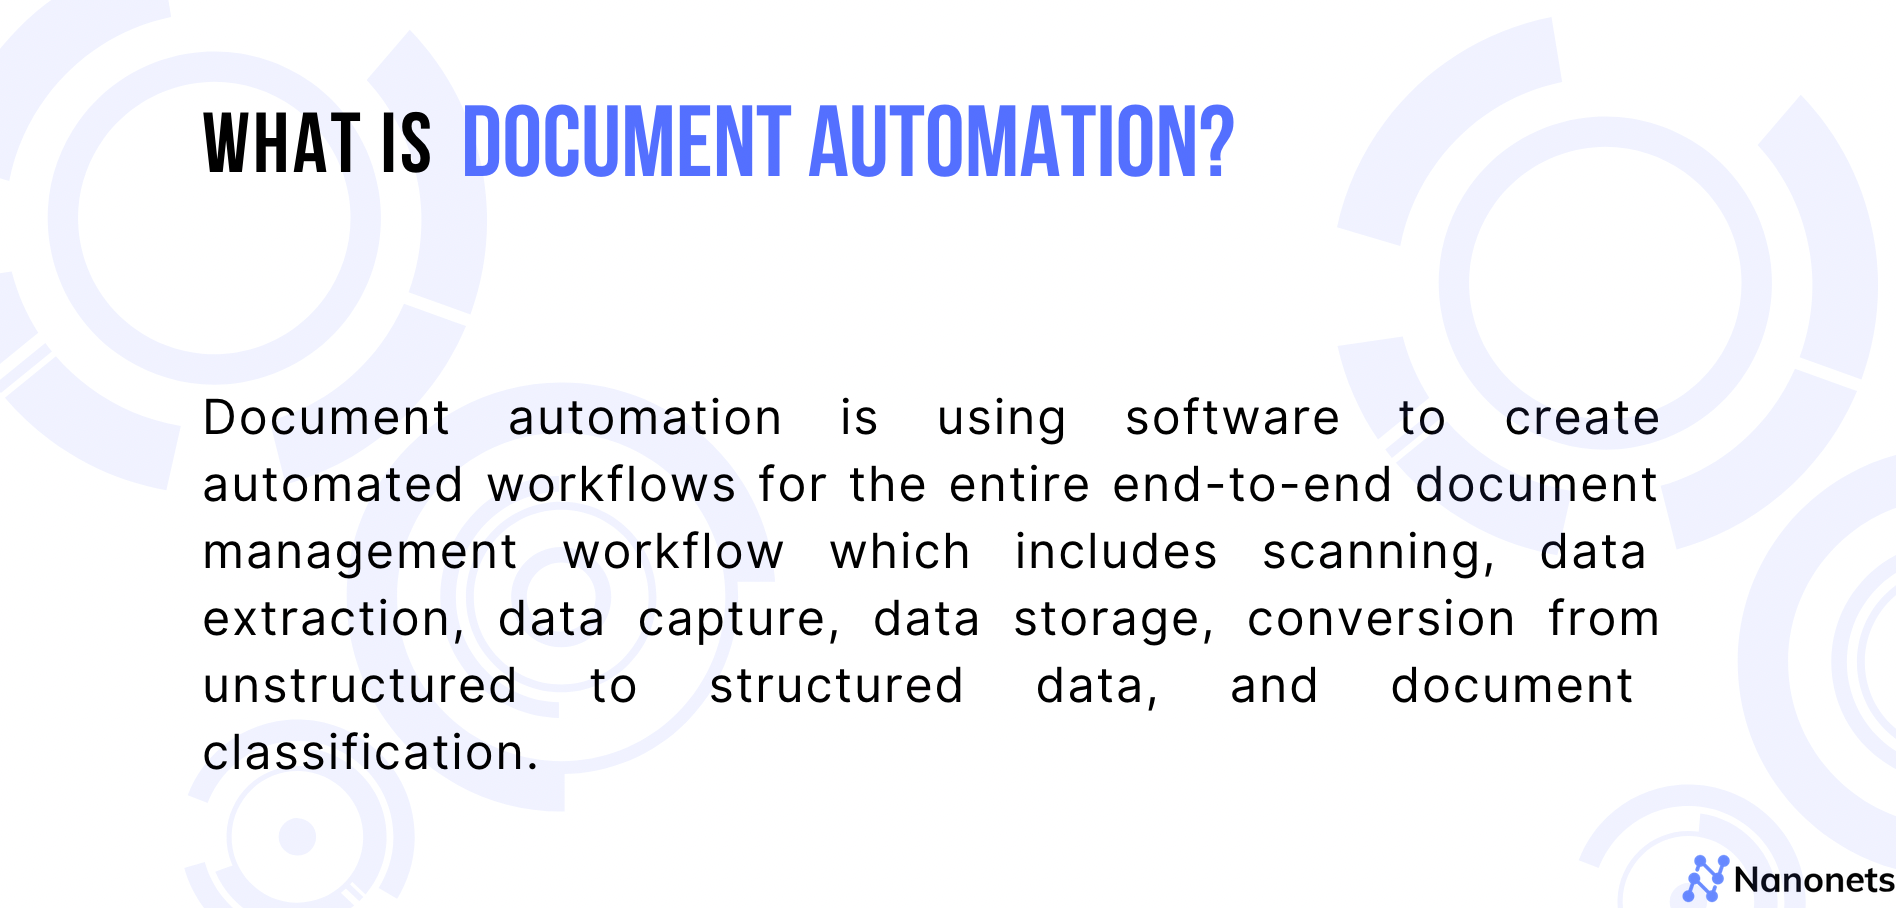 What is document automation & how does it work?